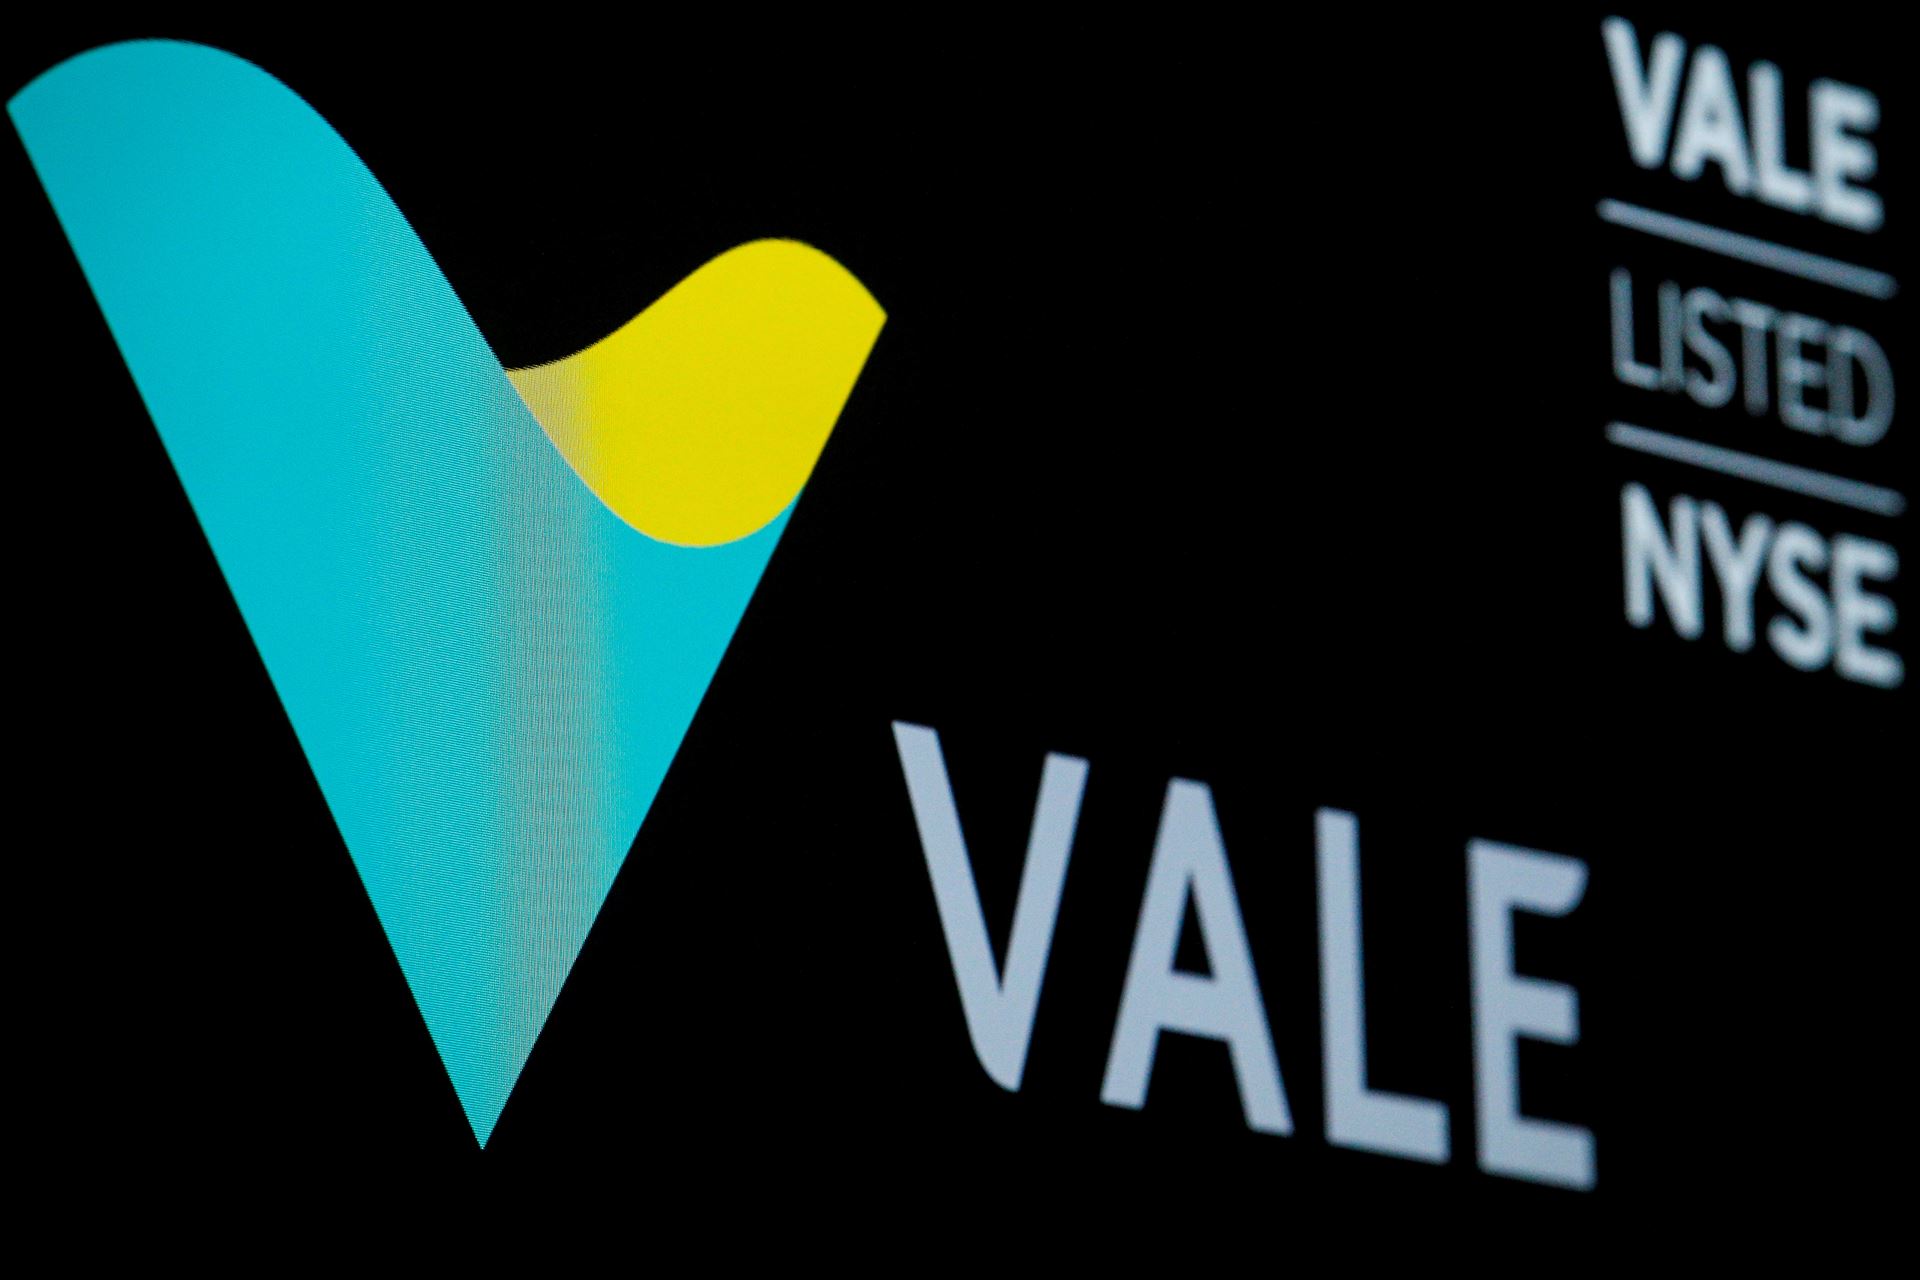 Vale's iron ore exports increased in May